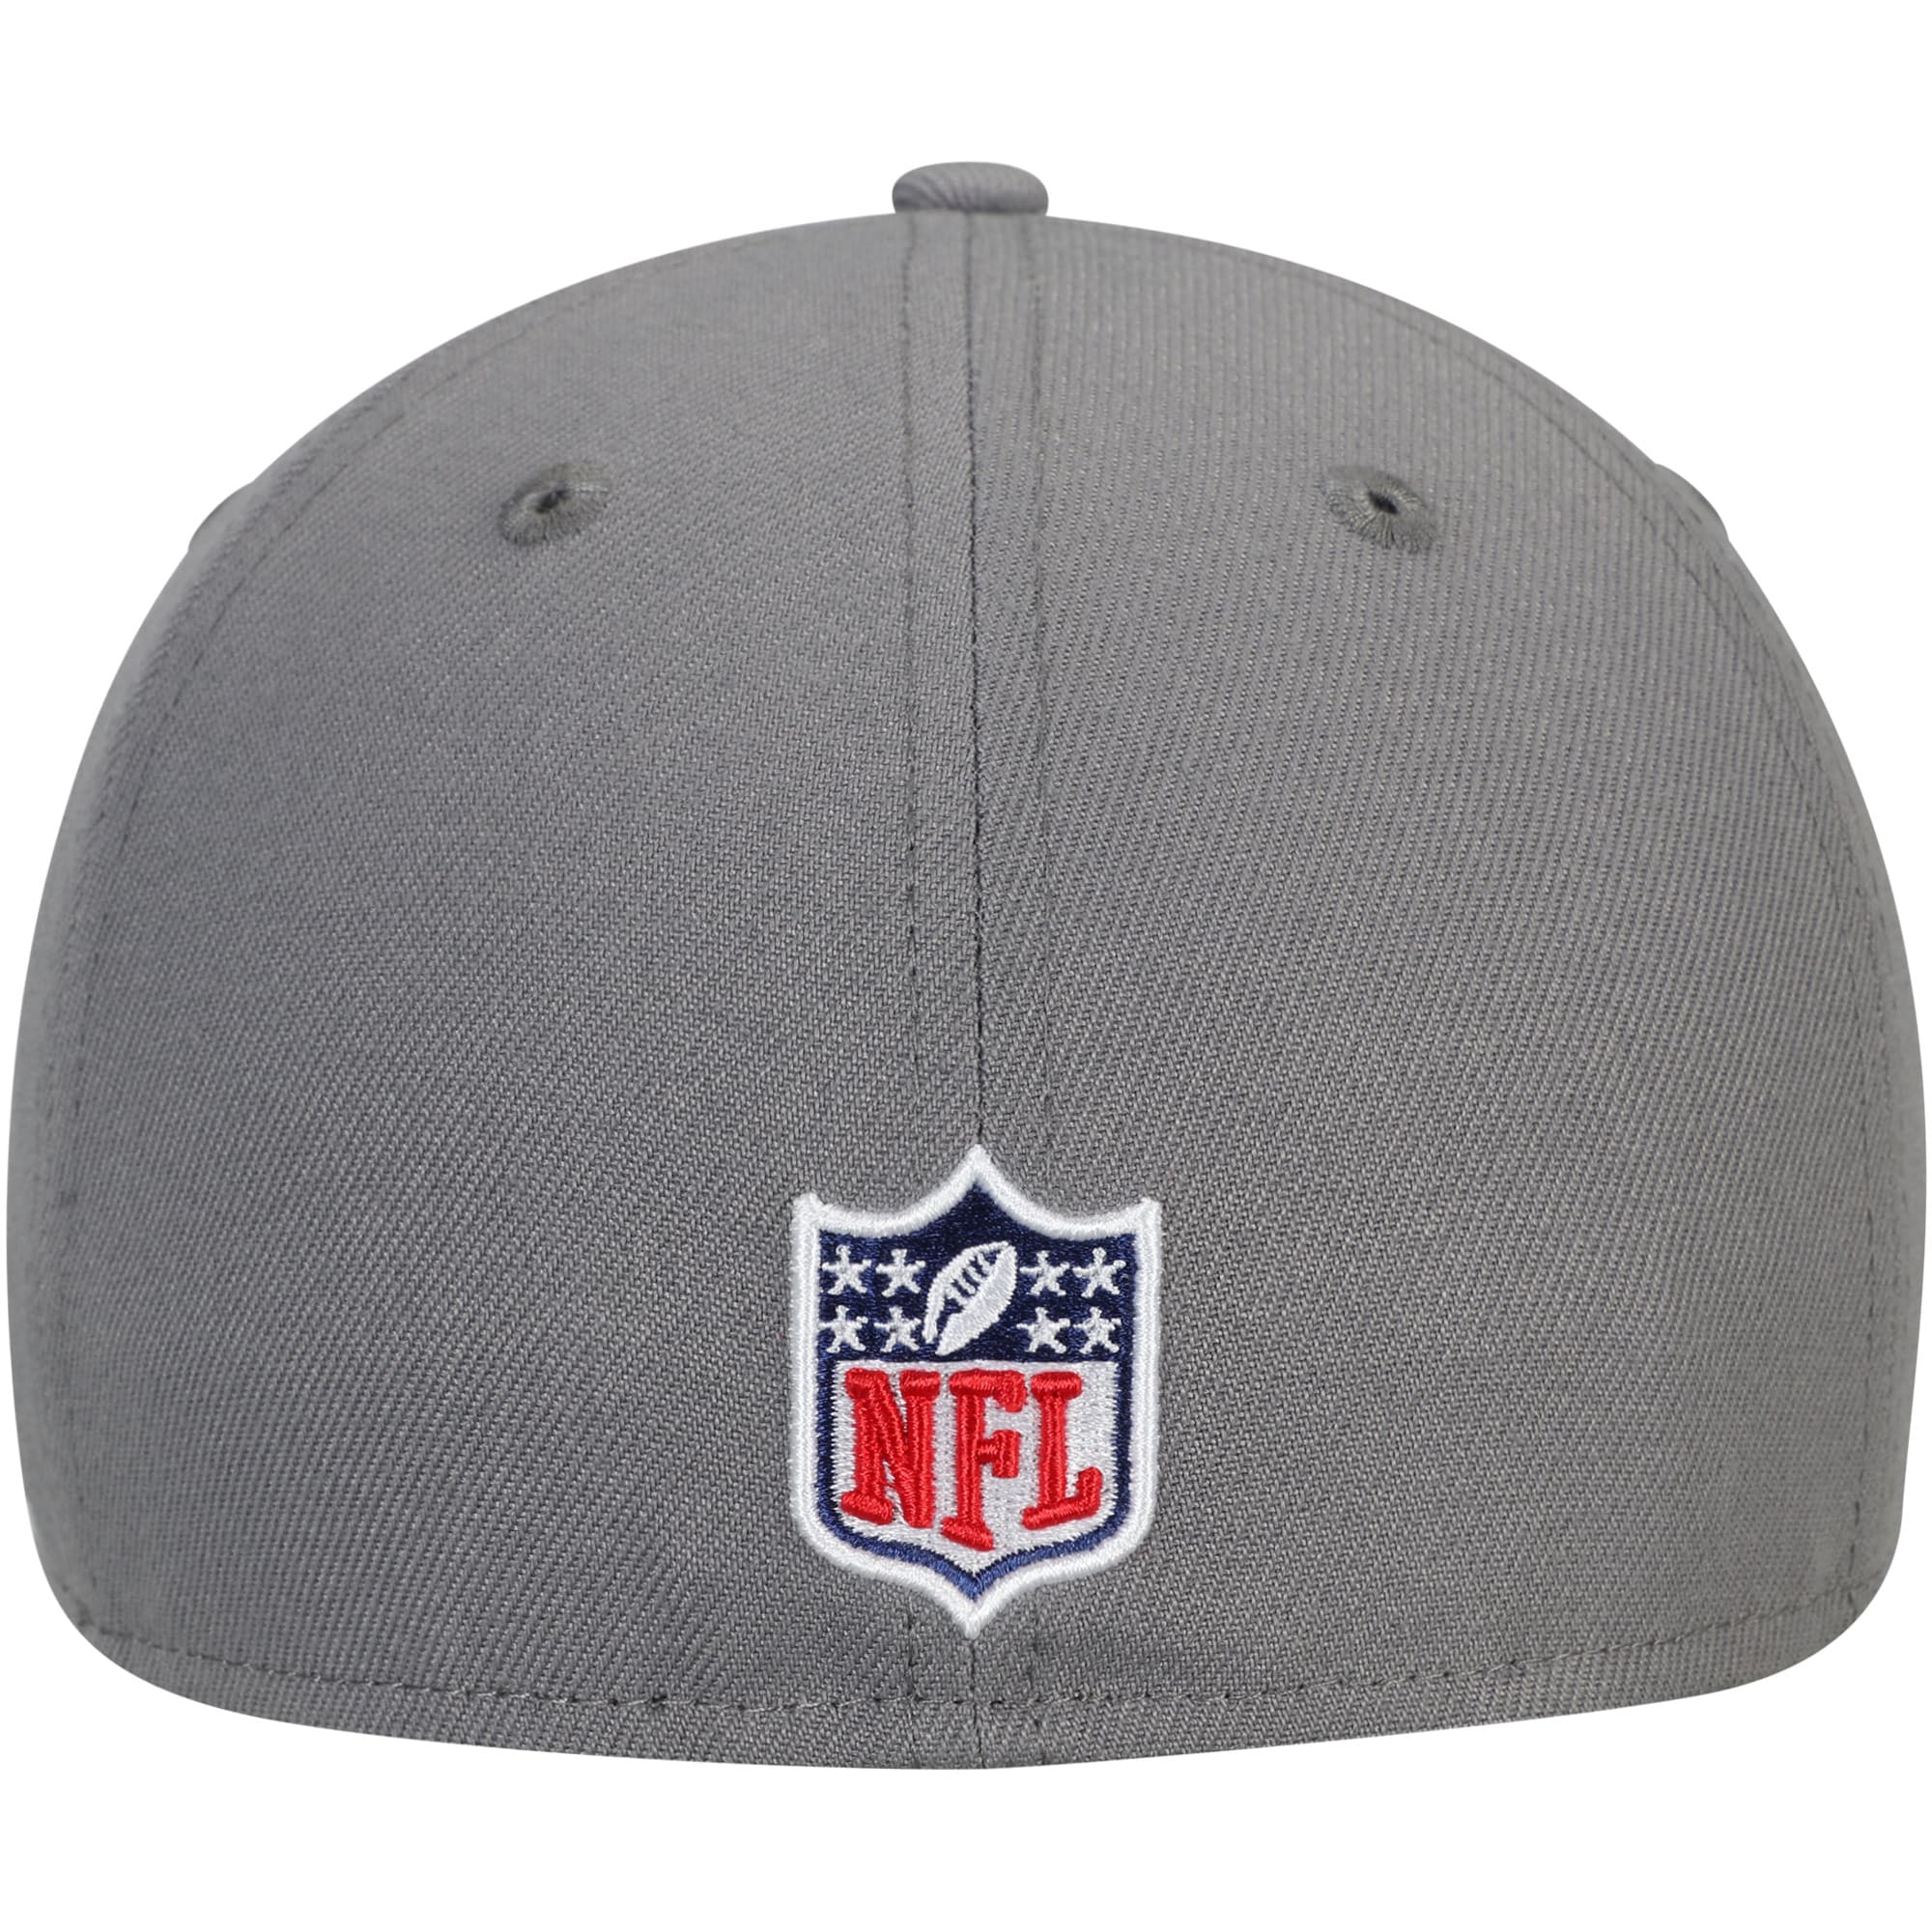 Men's New Era Graphite Cleveland Browns Storm 59FIFTY Fitted Hat - image 4 of 4